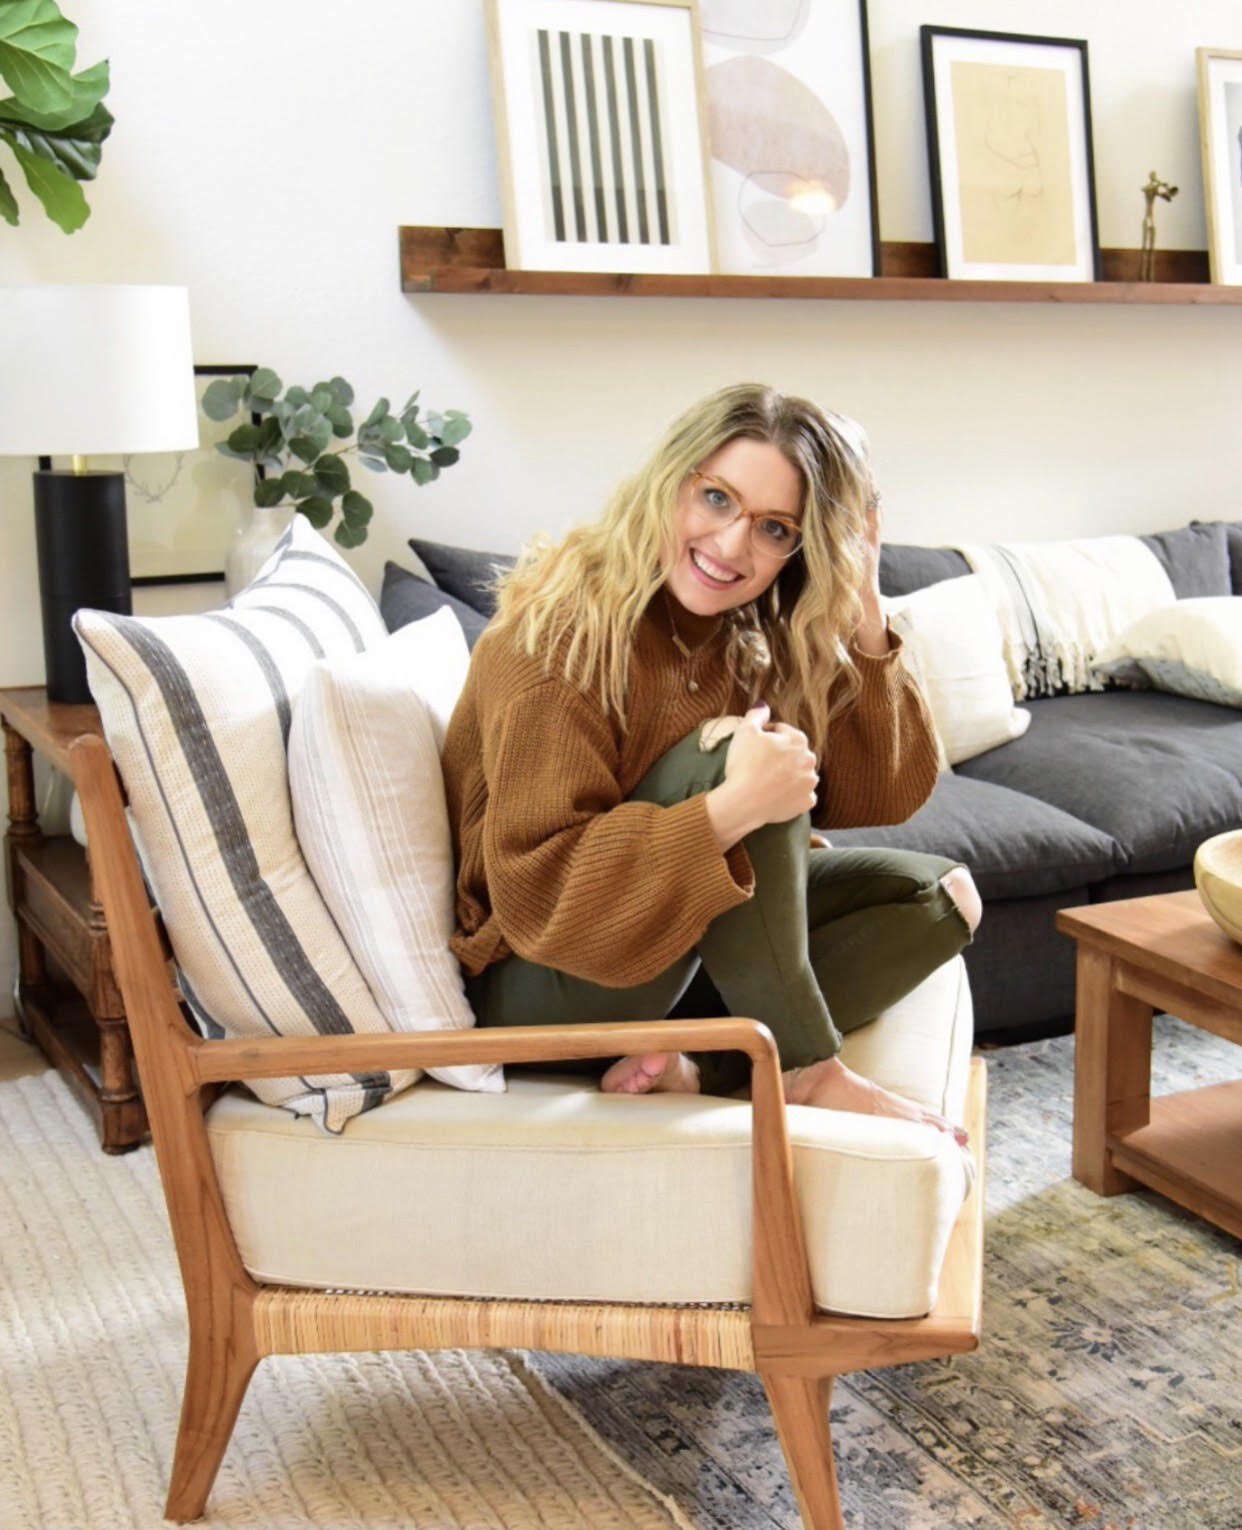 I asked 5 interior designers - "What is the first thing you do when designing a room from scratch?" Erin Conway shares her tips on how to design a home. Article by Nadine Stay